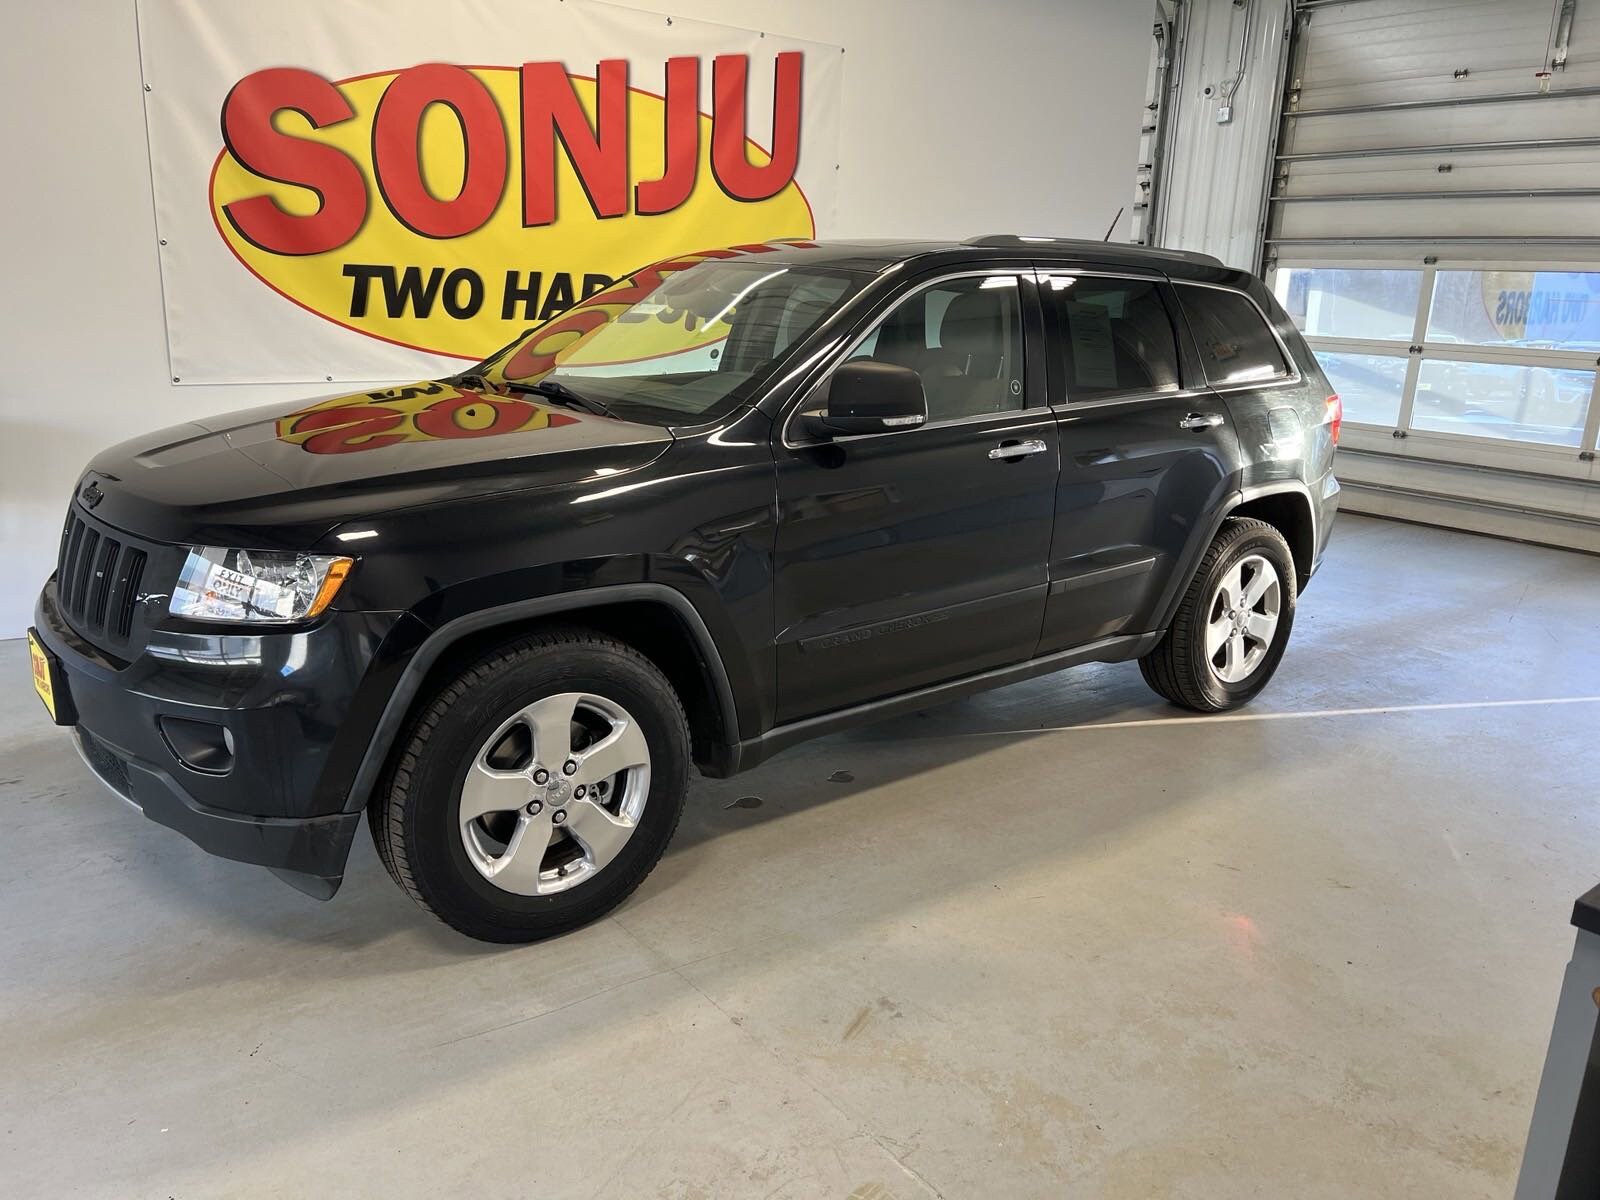 Used 2011 Jeep Grand Cherokee Limited with VIN 1J4RR5GG1BC554737 for sale in Two Harbors, Minnesota